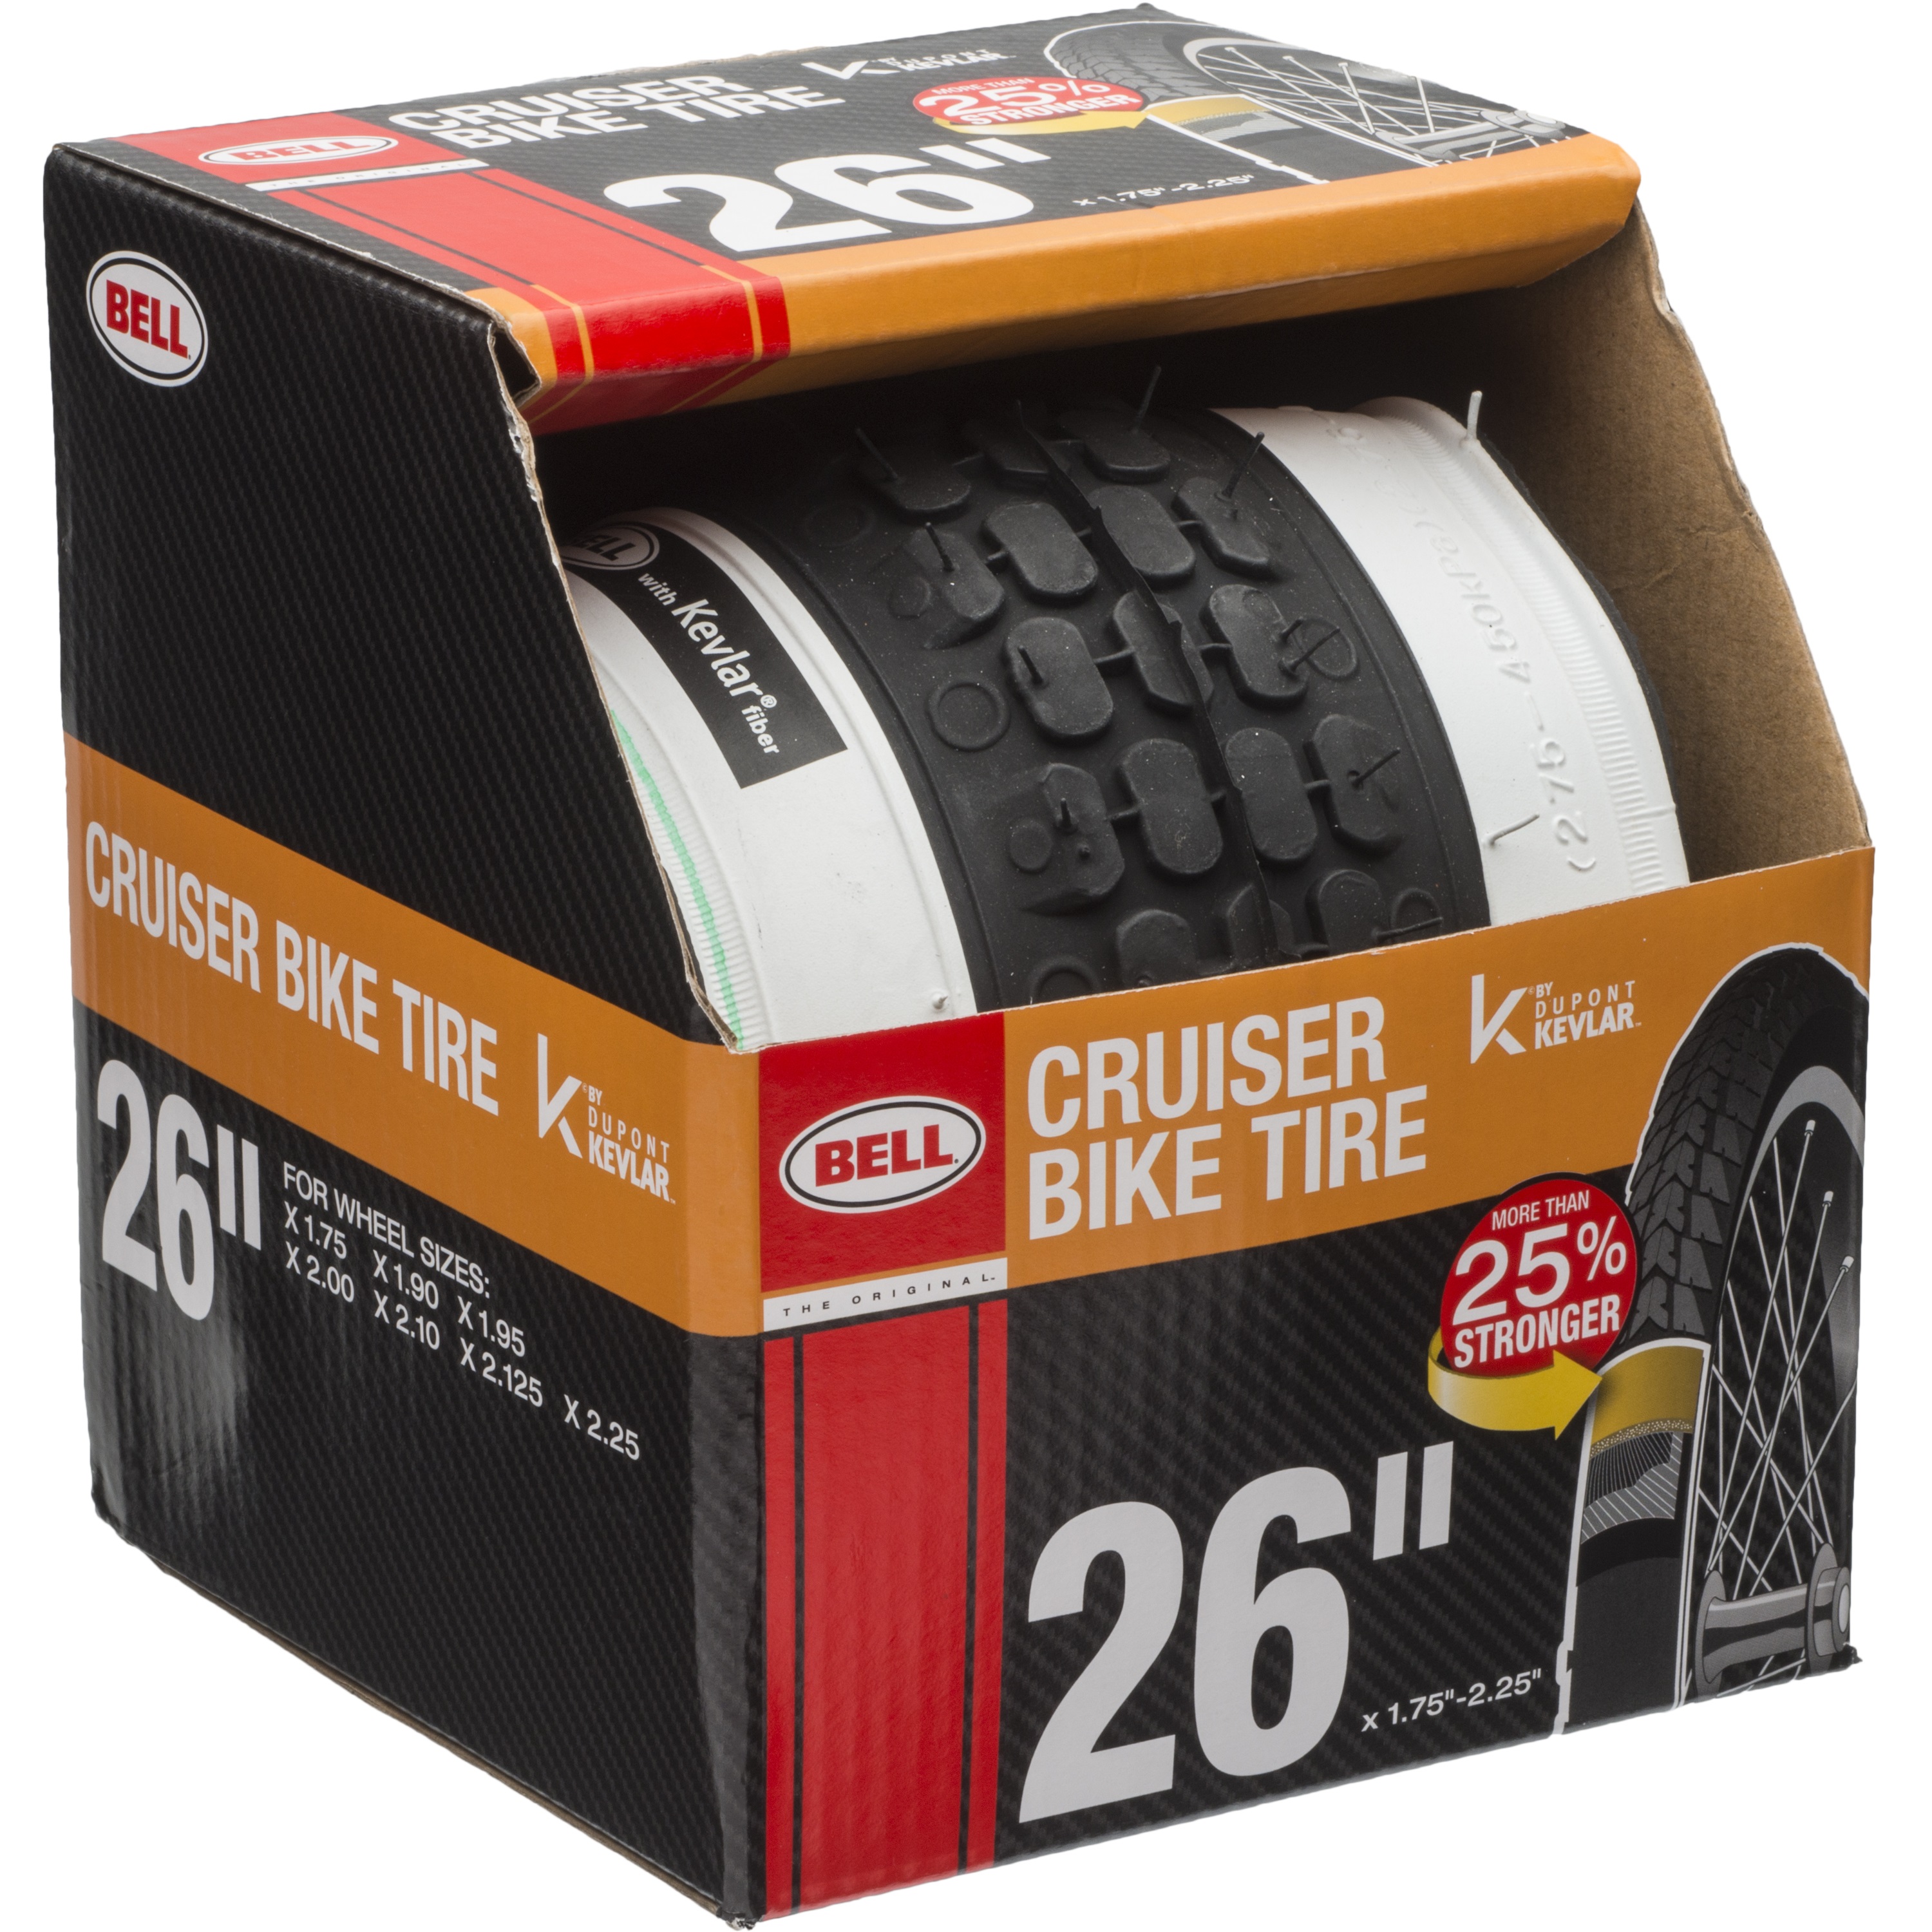 Bell Sports Cruiser Glide Whitewall Bike Tire with Kevlar, 26" x 1.75-2.25" - image 1 of 3